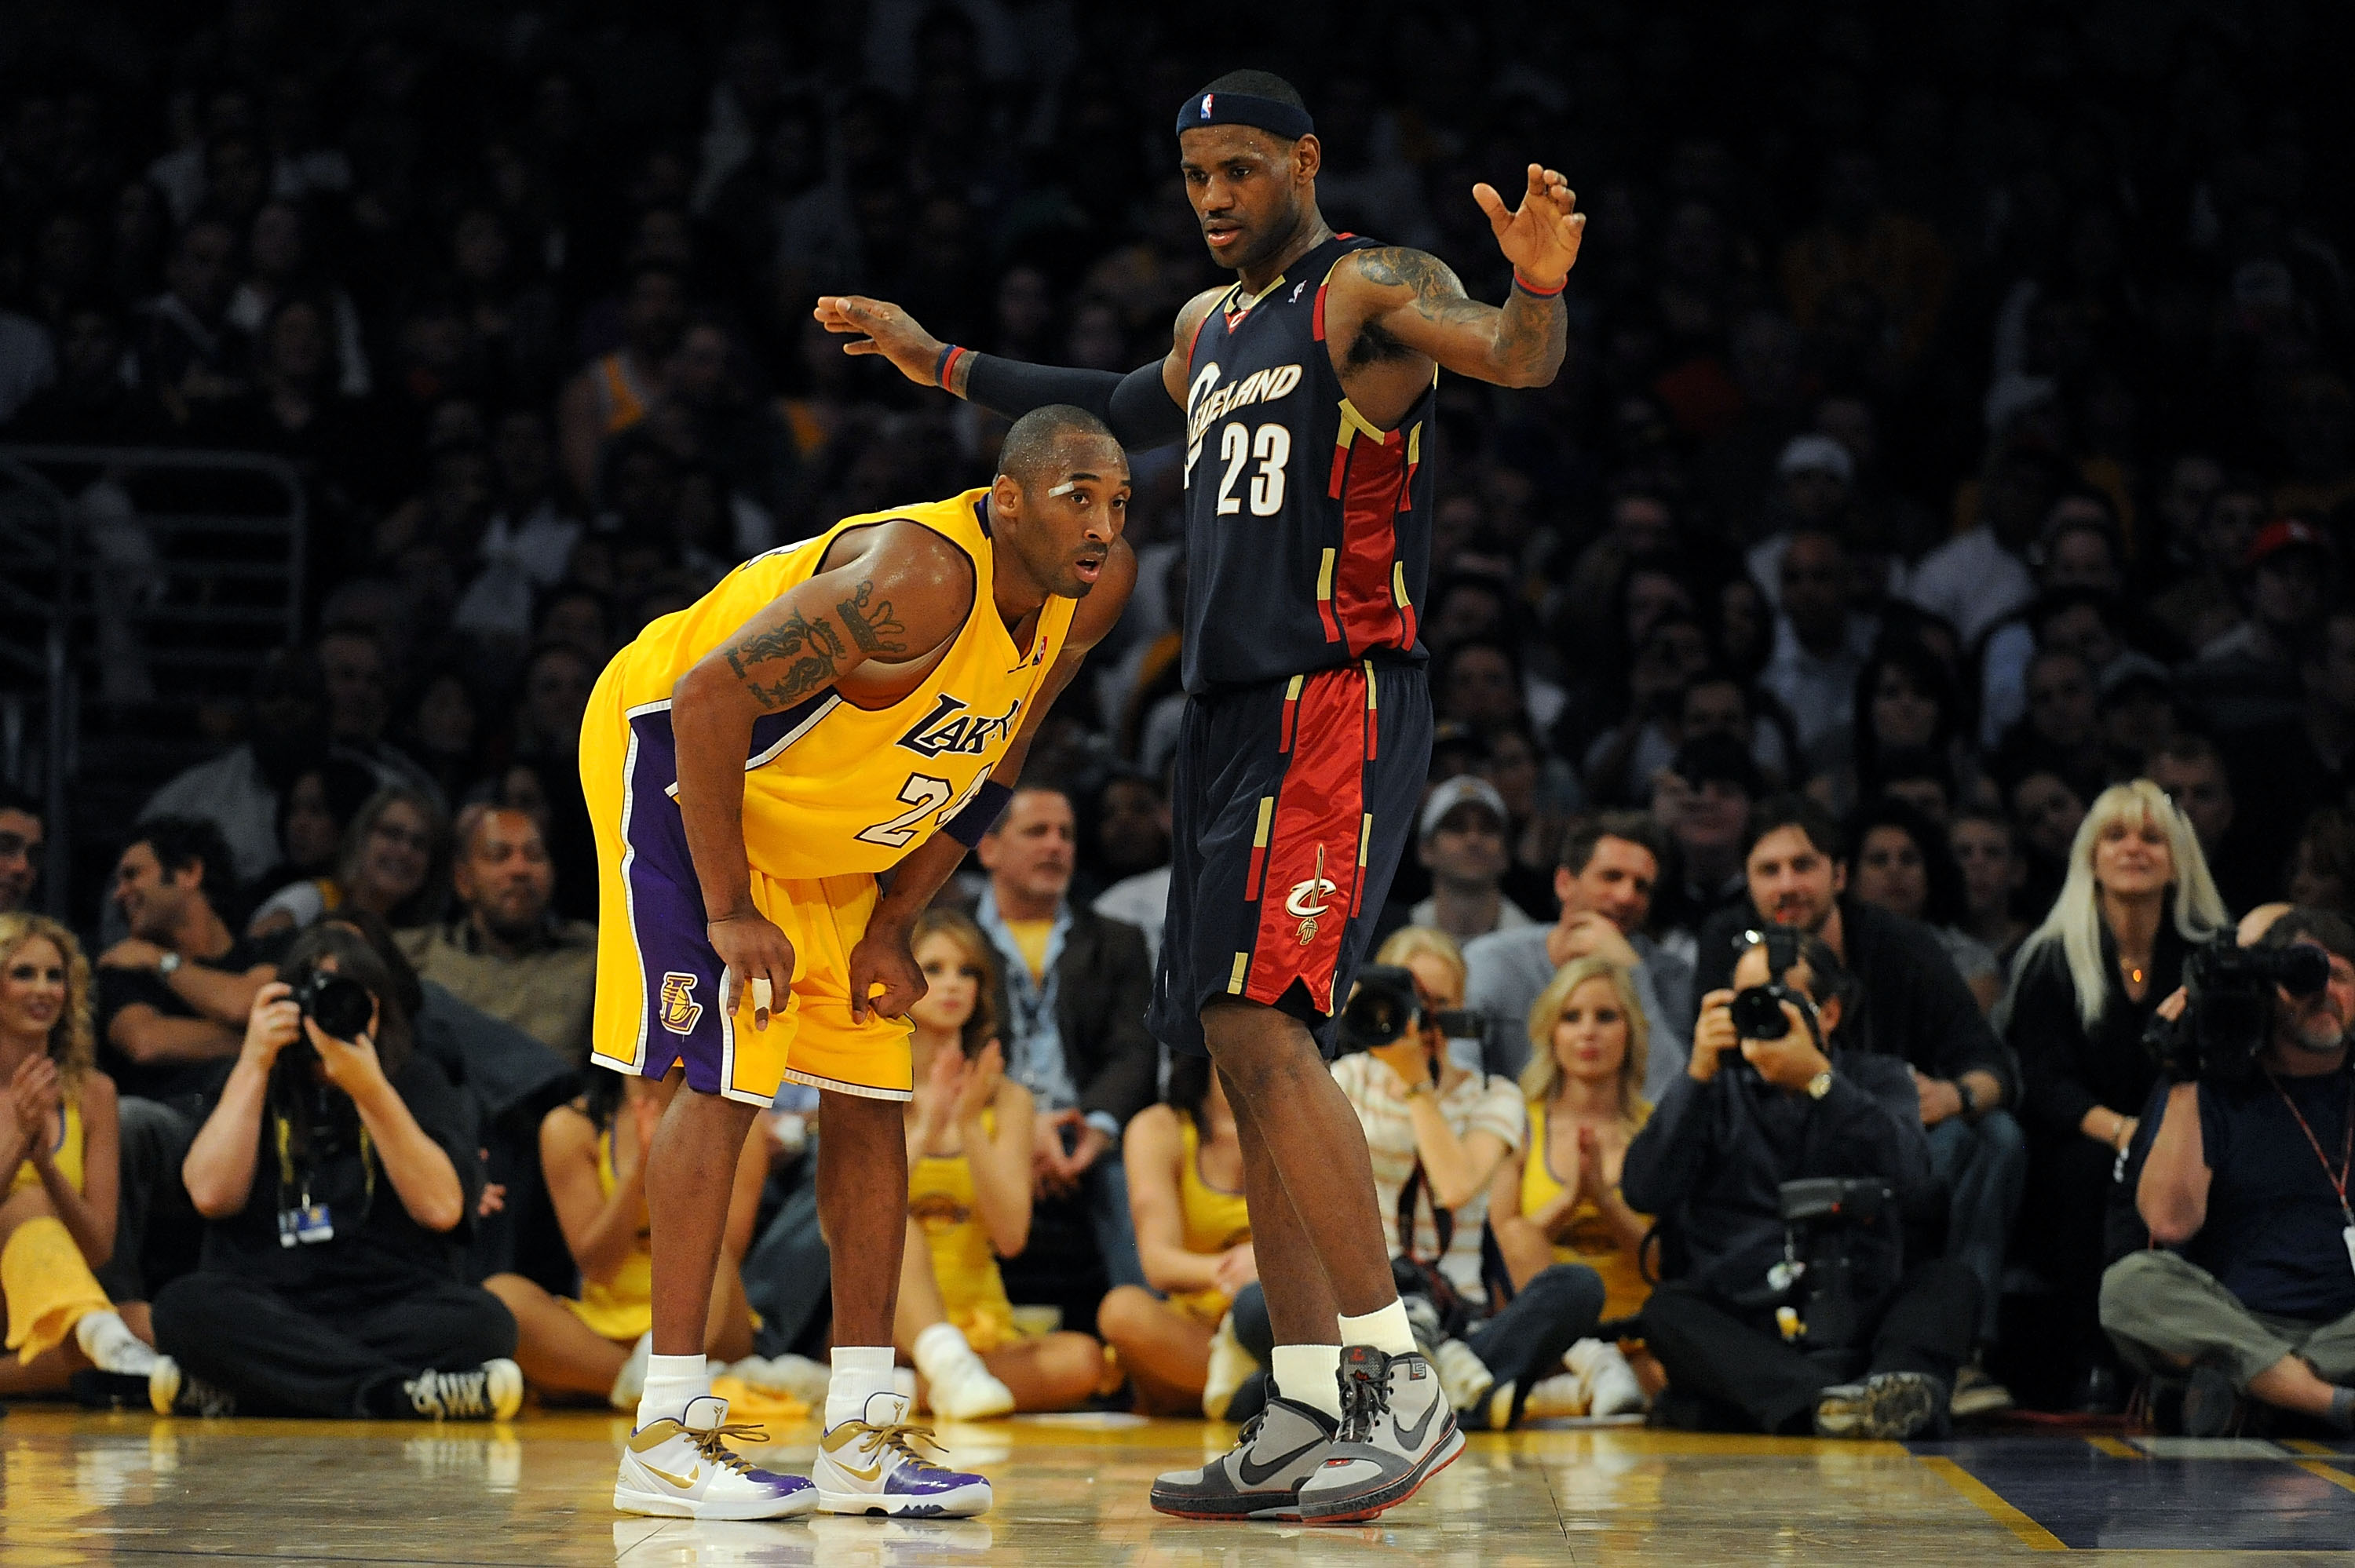 LOS ANGELES, CA - JANUARY 19:  Kobe Bryant #24 of the Los Angeles Lakers stands next to LeBron James #23 of the Cleveland Cavaliers during the second quarter at Staples Center on January 19, 2009 in Los Angeles, California.  (Photo by Harry How/Getty Imag